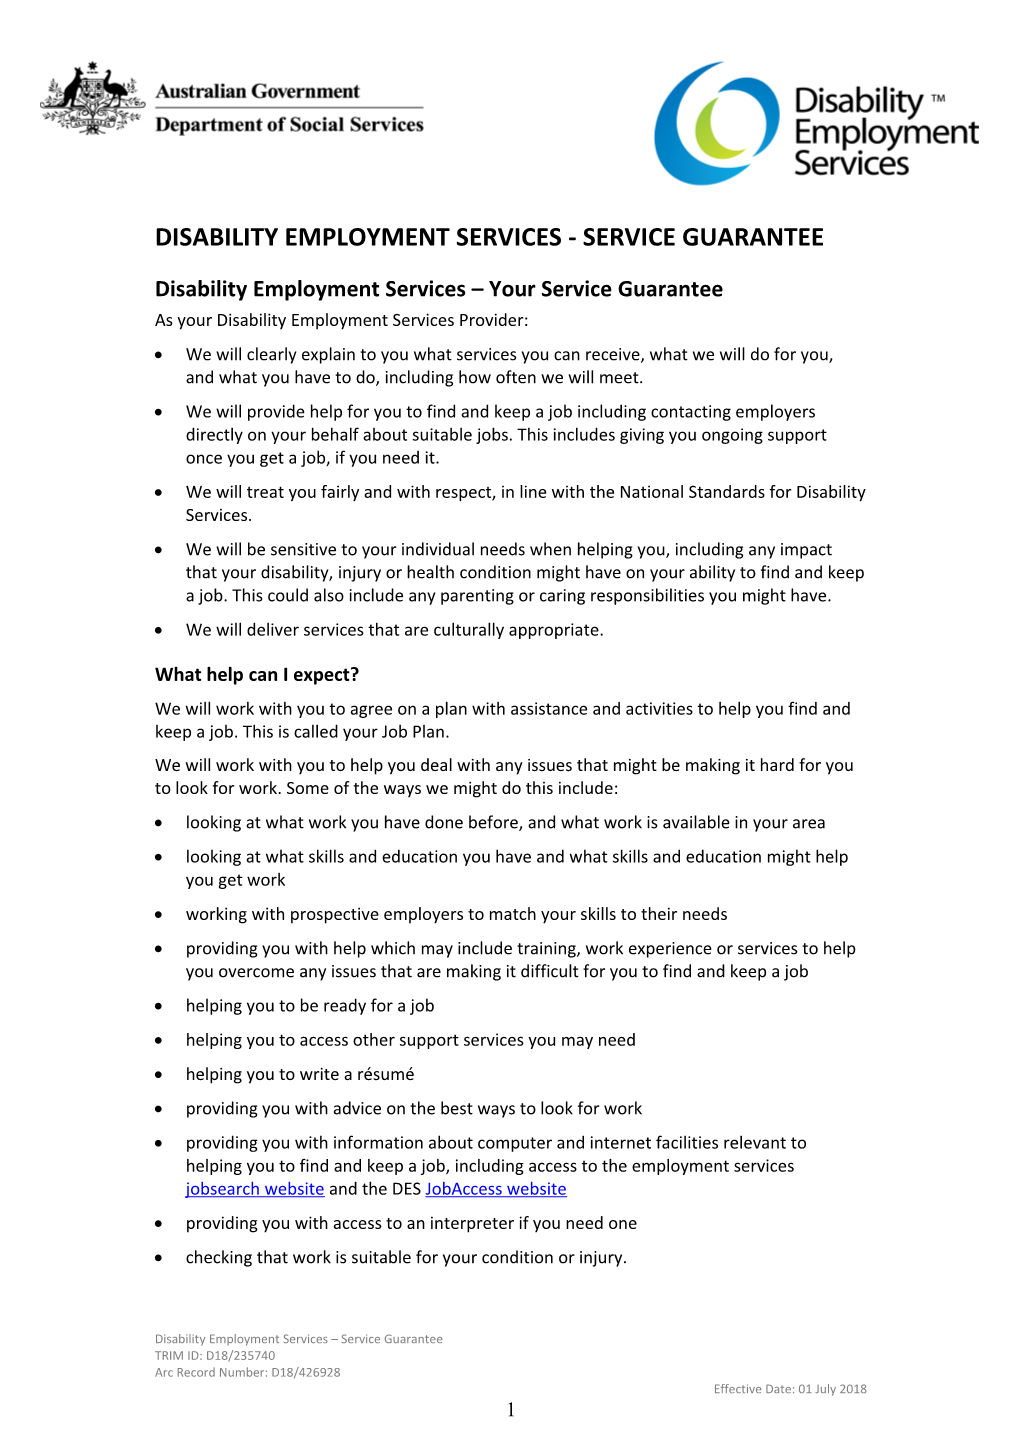 Disability Employment Services- Service Guarantee